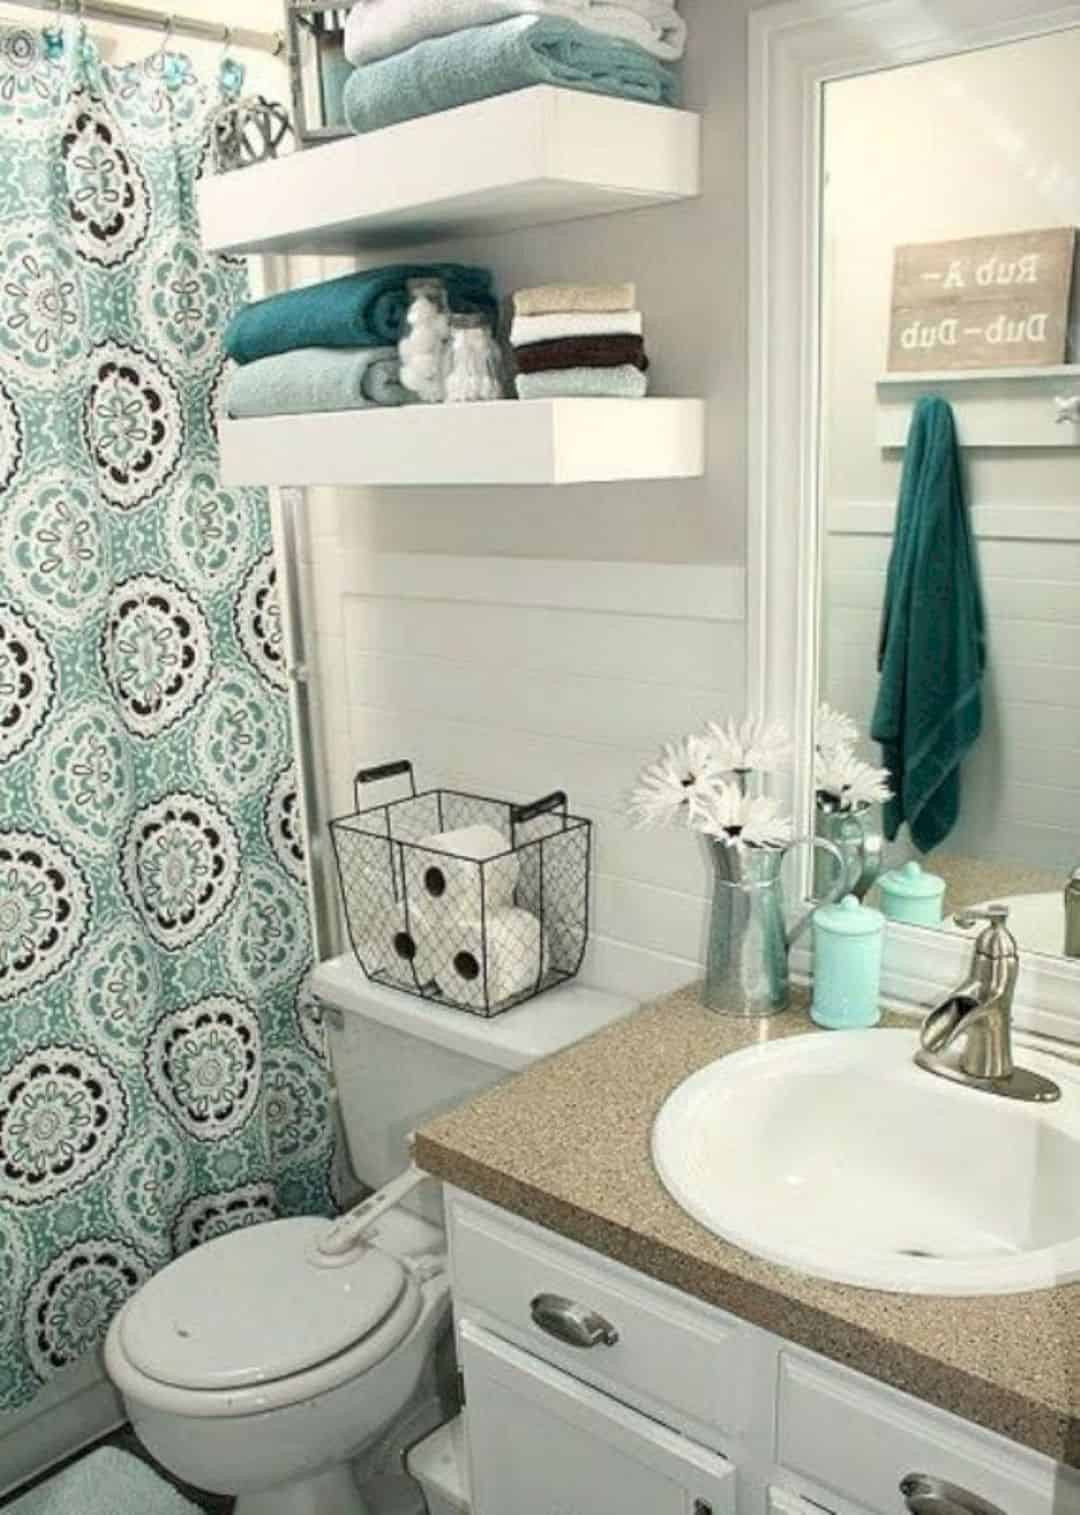 Small Bathroom Ideas Pictures
 17 Awesome Small Bathroom Decorating Ideas